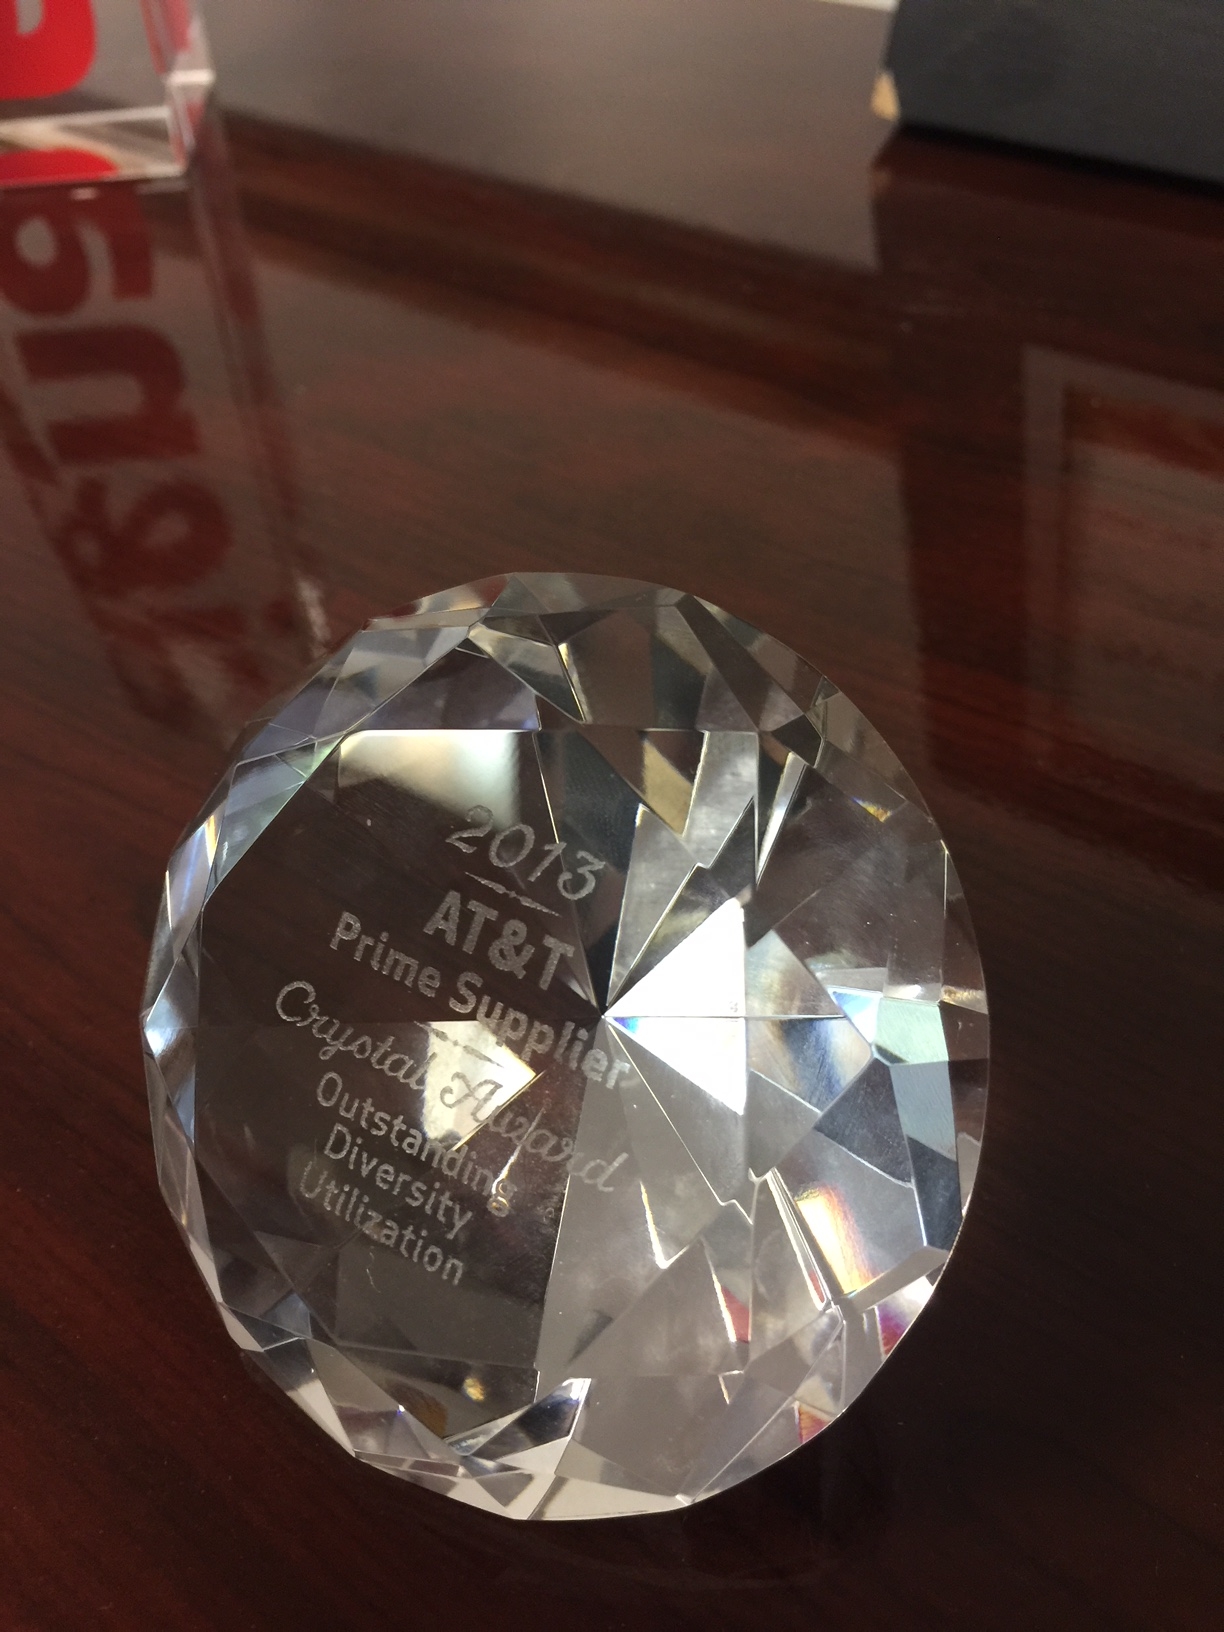 Northcentral Telcom - 2013 AT&T Prime Supplier Crystal Award